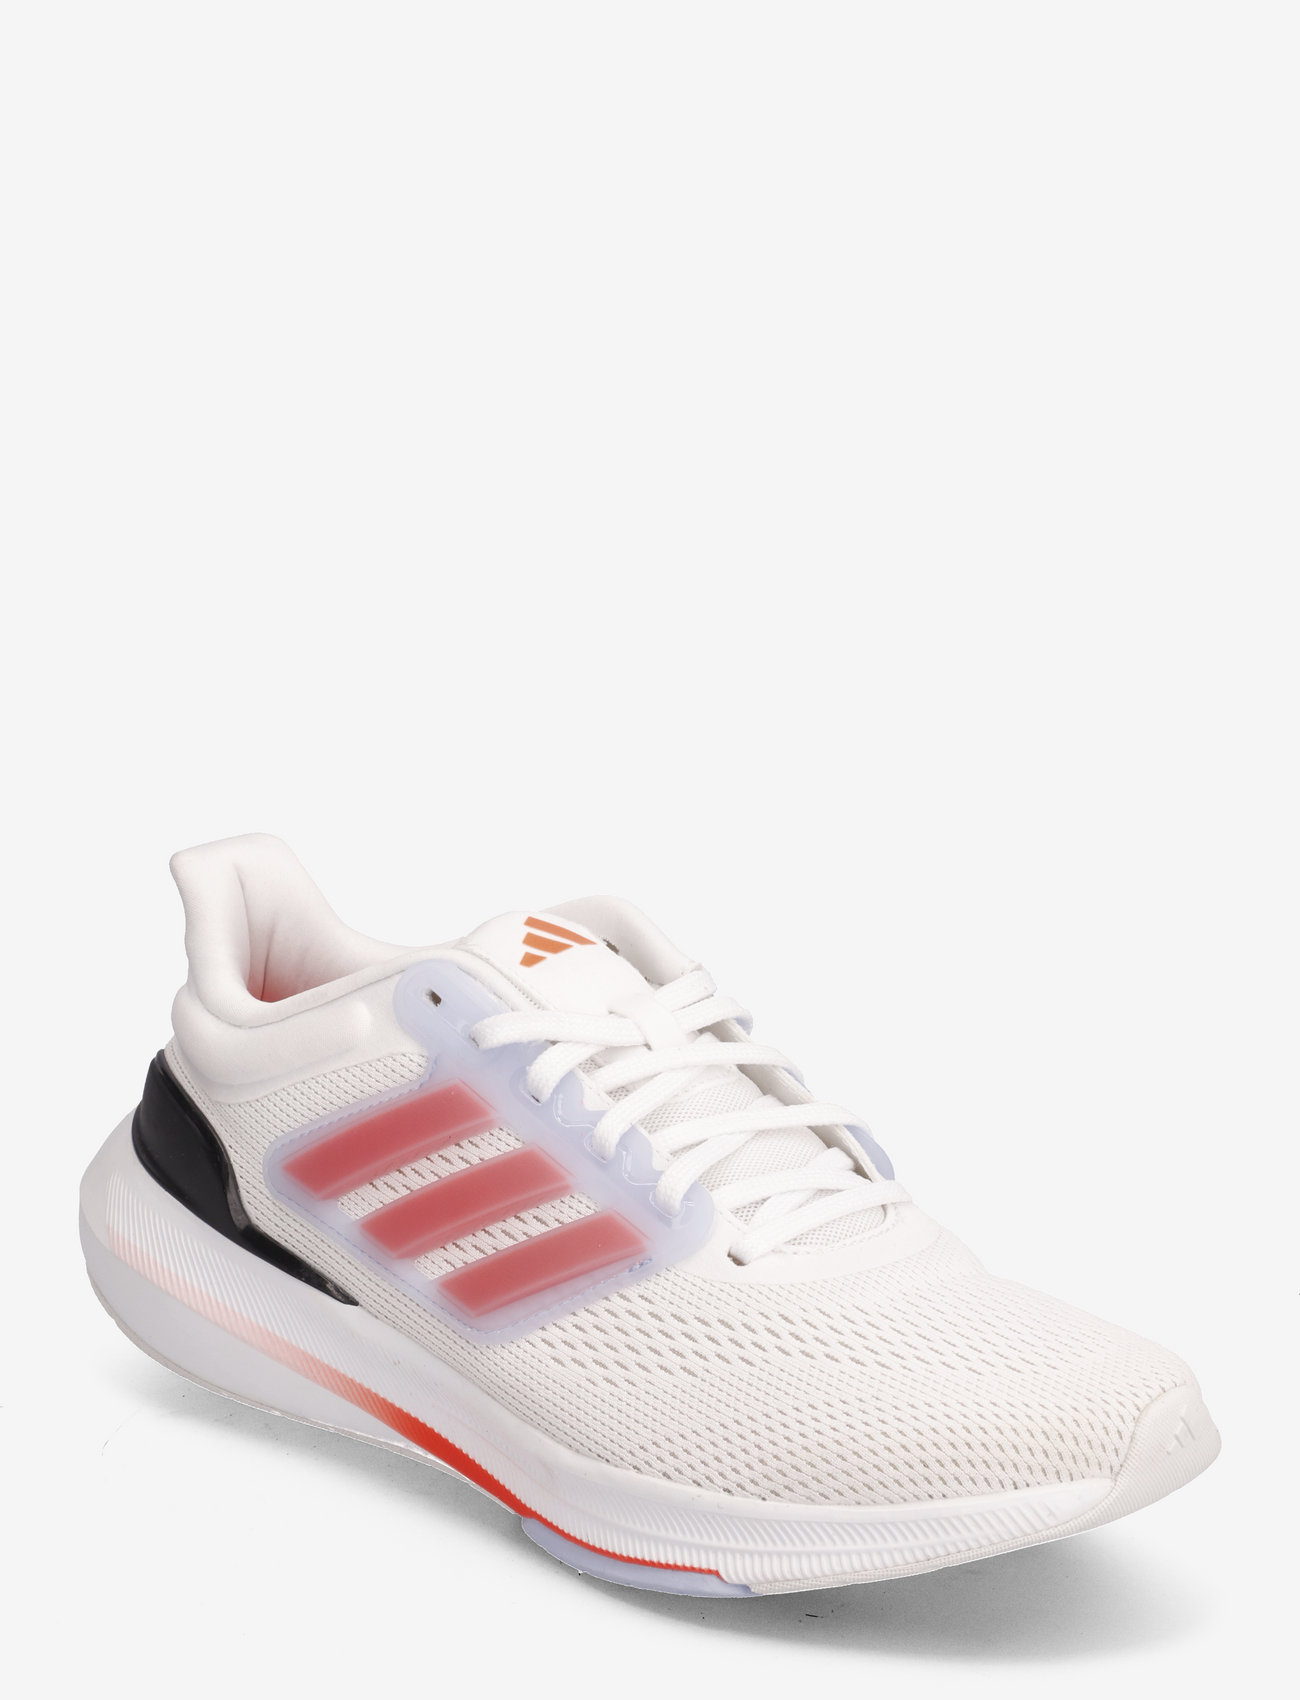 adidas Performance - Ultrabounce Shoes - laufschuhe - ftwwht/solred/crywht - 1